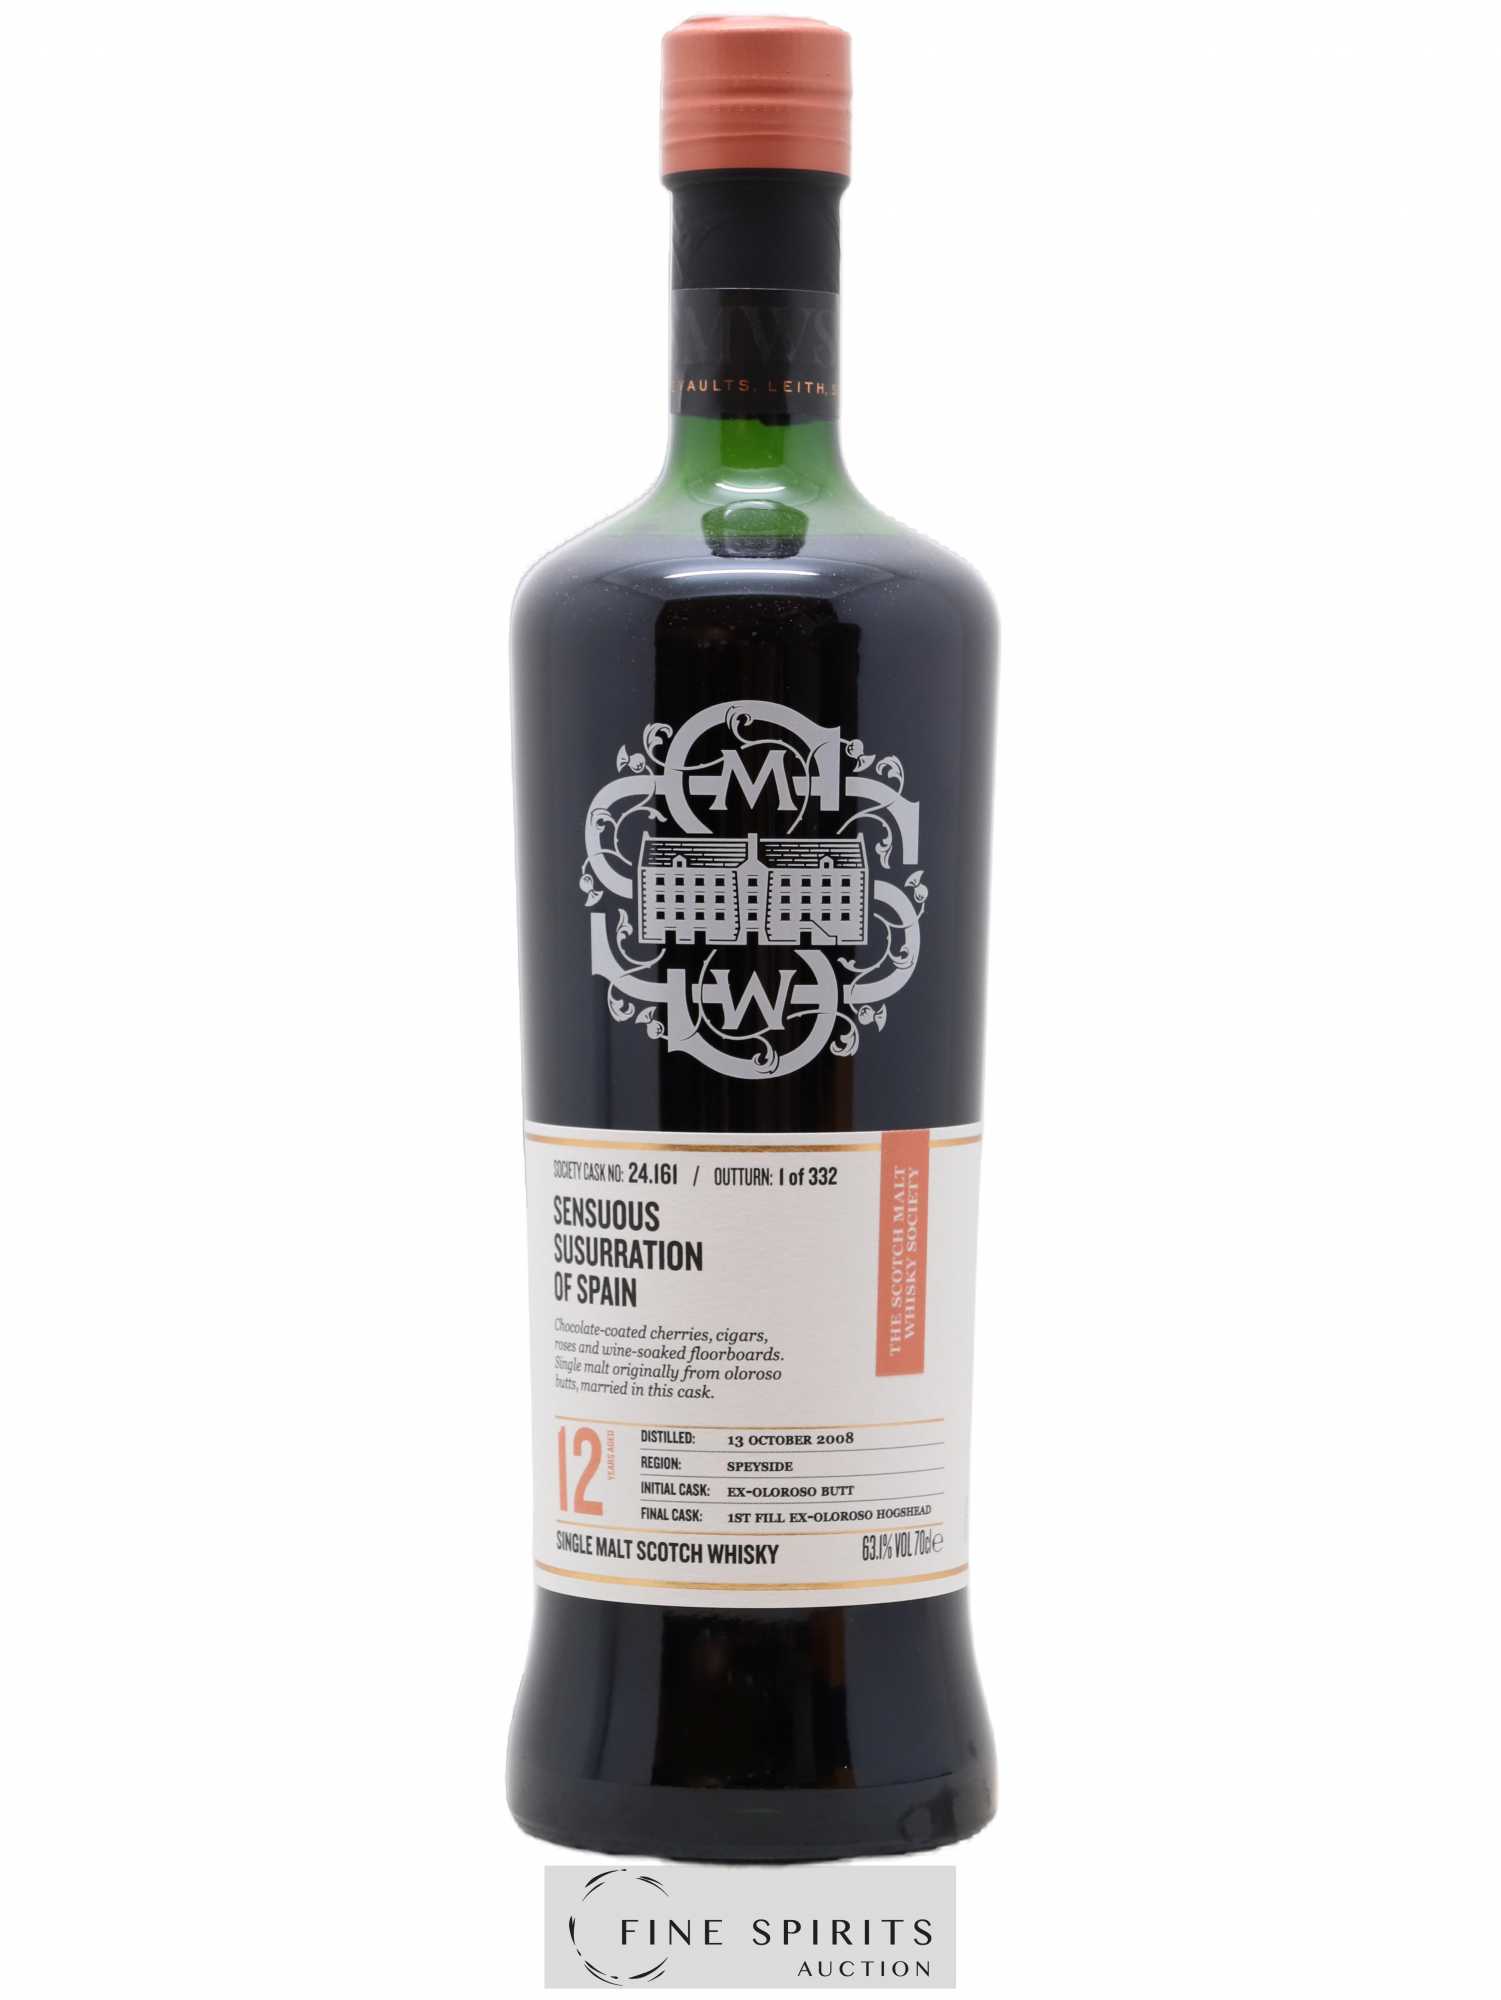 Sensuous Susurration of Spain 12 years 2008 The Scotch Malt Whisky Society Cask n°24.146 - One of 344